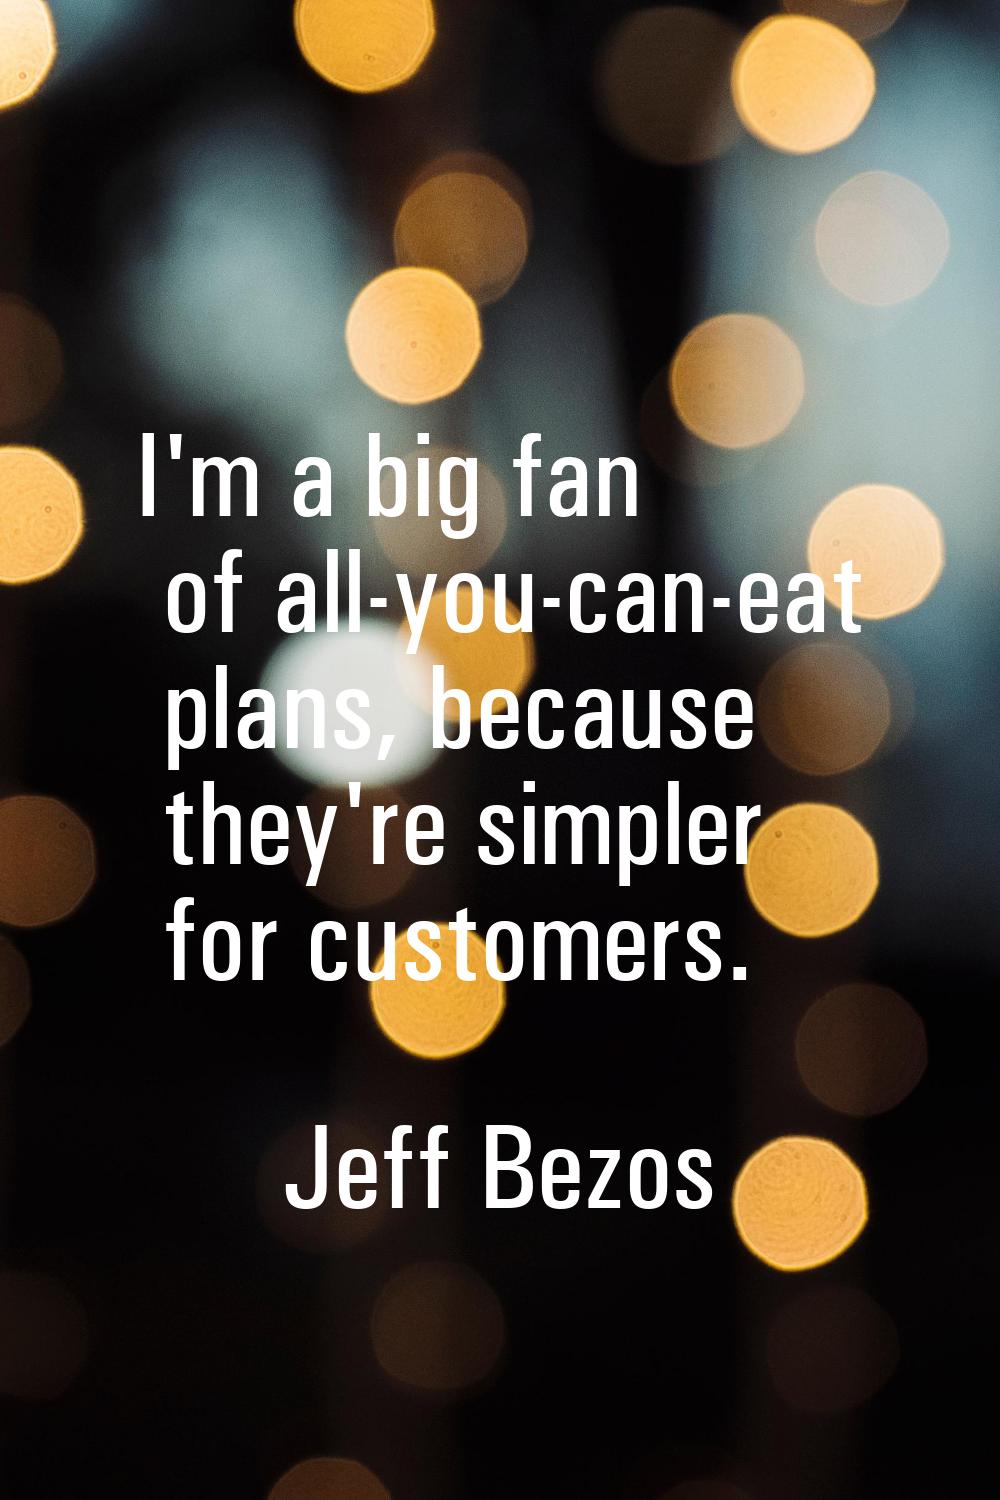 I'm a big fan of all-you-can-eat plans, because they're simpler for customers.